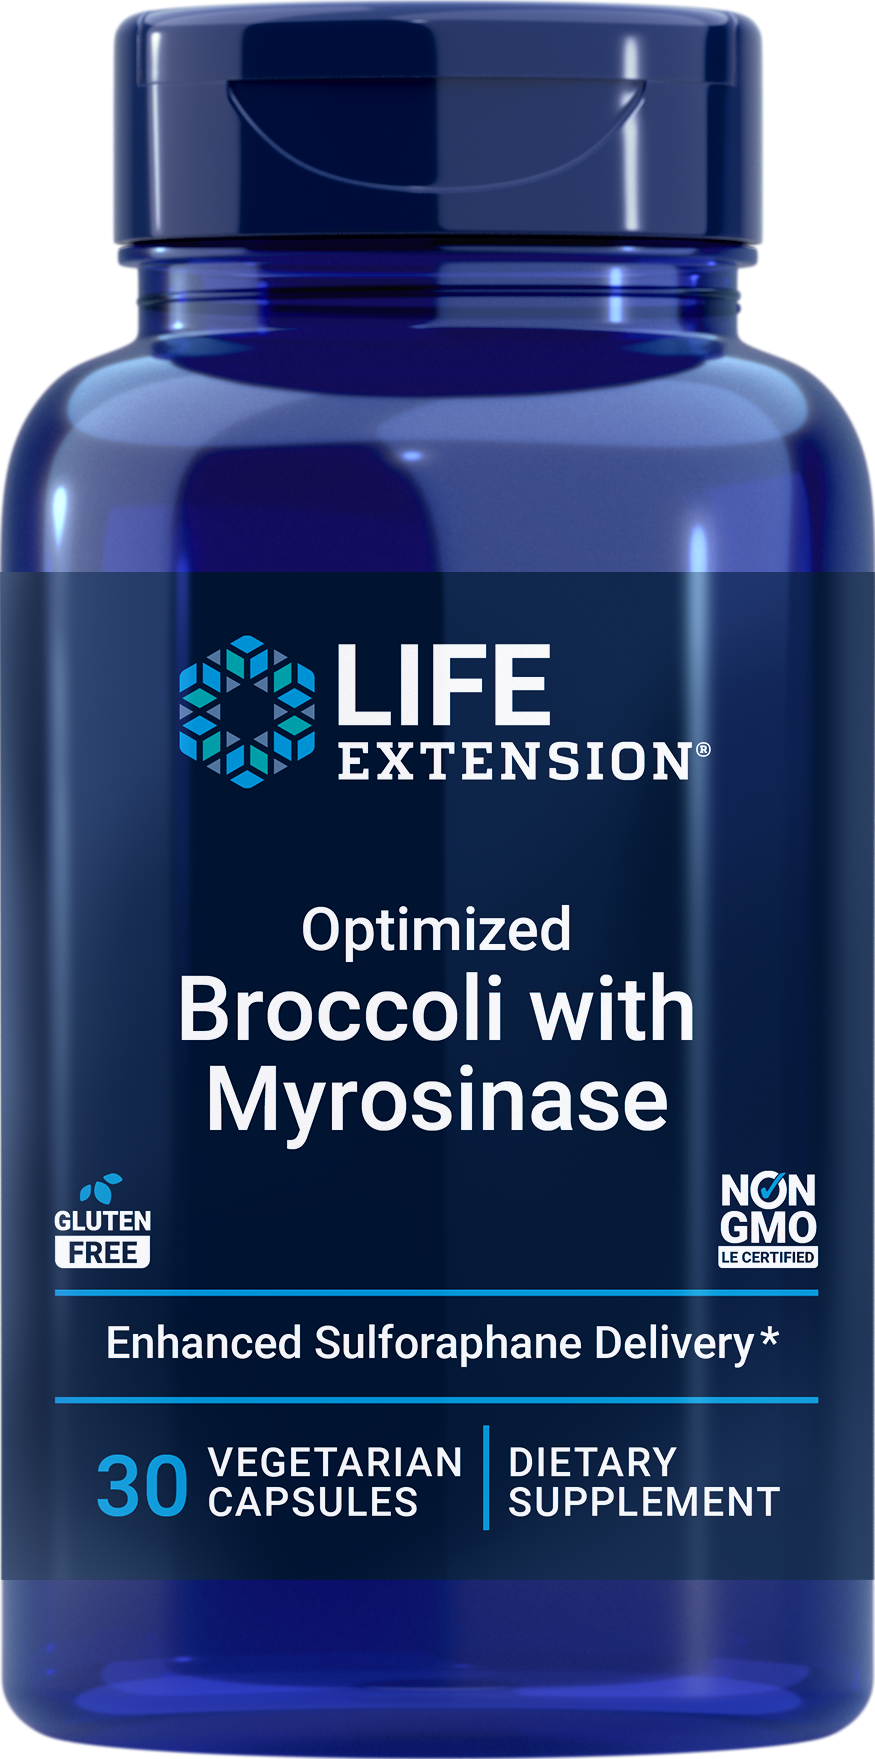 Optimized Broccoli with Myrosinase provides a clinically studied extract that improves the conversion of glucoraphanin, a compound found in broccoli, into sulforaphane. Sulforaphane is a nutrient obtained from broccoli that is notoriously difficult to take in supplement form, and it is thought to have many health benefits. We’ve combined a broccoli seed extract with myrosinase from white mustard seed powder to increase sulforaphane formation and uptake during digestion.